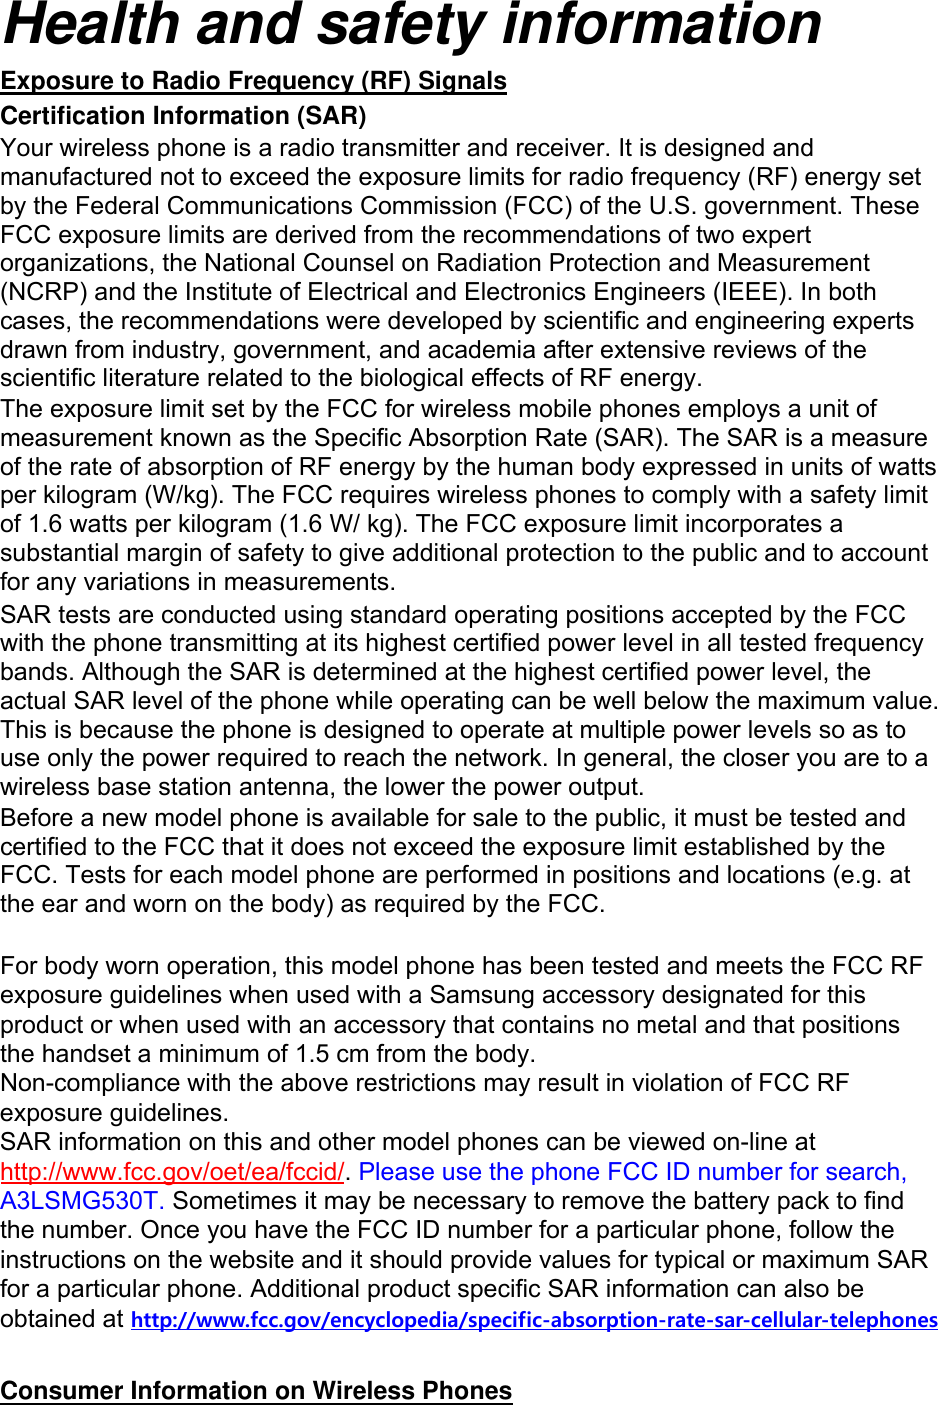 Health and safety information Exposure to Radio Frequency (RF) Signals Certification Information (SAR) Your wireless phone is a radio transmitter and receiver. It is designed and manufactured not to exceed the exposure limits for radio frequency (RF) energy set by the Federal Communications Commission (FCC) of the U.S. government. These FCC exposure limits are derived from the recommendations of two expert organizations, the National Counsel on Radiation Protection and Measurement (NCRP) and the Institute of Electrical and Electronics Engineers (IEEE). In both cases, the recommendations were developed by scientific and engineering experts drawn from industry, government, and academia after extensive reviews of the scientific literature related to the biological effects of RF energy. The exposure limit set by the FCC for wireless mobile phones employs a unit of measurement known as the Specific Absorption Rate (SAR). The SAR is a measure of the rate of absorption of RF energy by the human body expressed in units of watts per kilogram (W/kg). The FCC requires wireless phones to comply with a safety limit of 1.6 watts per kilogram (1.6 W/ kg). The FCC exposure limit incorporates a substantial margin of safety to give additional protection to the public and to account for any variations in measurements. SAR tests are conducted using standard operating positions accepted by the FCC with the phone transmitting at its highest certified power level in all tested frequency bands. Although the SAR is determined at the highest certified power level, the actual SAR level of the phone while operating can be well below the maximum value. This is because the phone is designed to operate at multiple power levels so as to use only the power required to reach the network. In general, the closer you are to a wireless base station antenna, the lower the power output. Before a new model phone is available for sale to the public, it must be tested and certified to the FCC that it does not exceed the exposure limit established by the FCC. Tests for each model phone are performed in positions and locations (e.g. at the ear and worn on the body) as required by the FCC.     For body worn operation, this model phone has been tested and meets the FCC RF exposure guidelines when used with a Samsung accessory designated for this product or when used with an accessory that contains no metal and that positions the handset a minimum of 1.5 cm from the body.  Non-compliance with the above restrictions may result in violation of FCC RF exposure guidelines. SAR information on this and other model phones can be viewed on-line at http://www.fcc.gov/oet/ea/fccid/. Please use the phone FCC ID number for search, A3LSMG530T. Sometimes it may be necessary to remove the battery pack to find the number. Once you have the FCC ID number for a particular phone, follow the instructions on the website and it should provide values for typical or maximum SAR for a particular phone. Additional product specific SAR information can also be obtained at http://www.fcc.gov/encyclopedia/specific-absorption-rate-sar-cellular-telephonesConsumer Information on Wireless Phones 